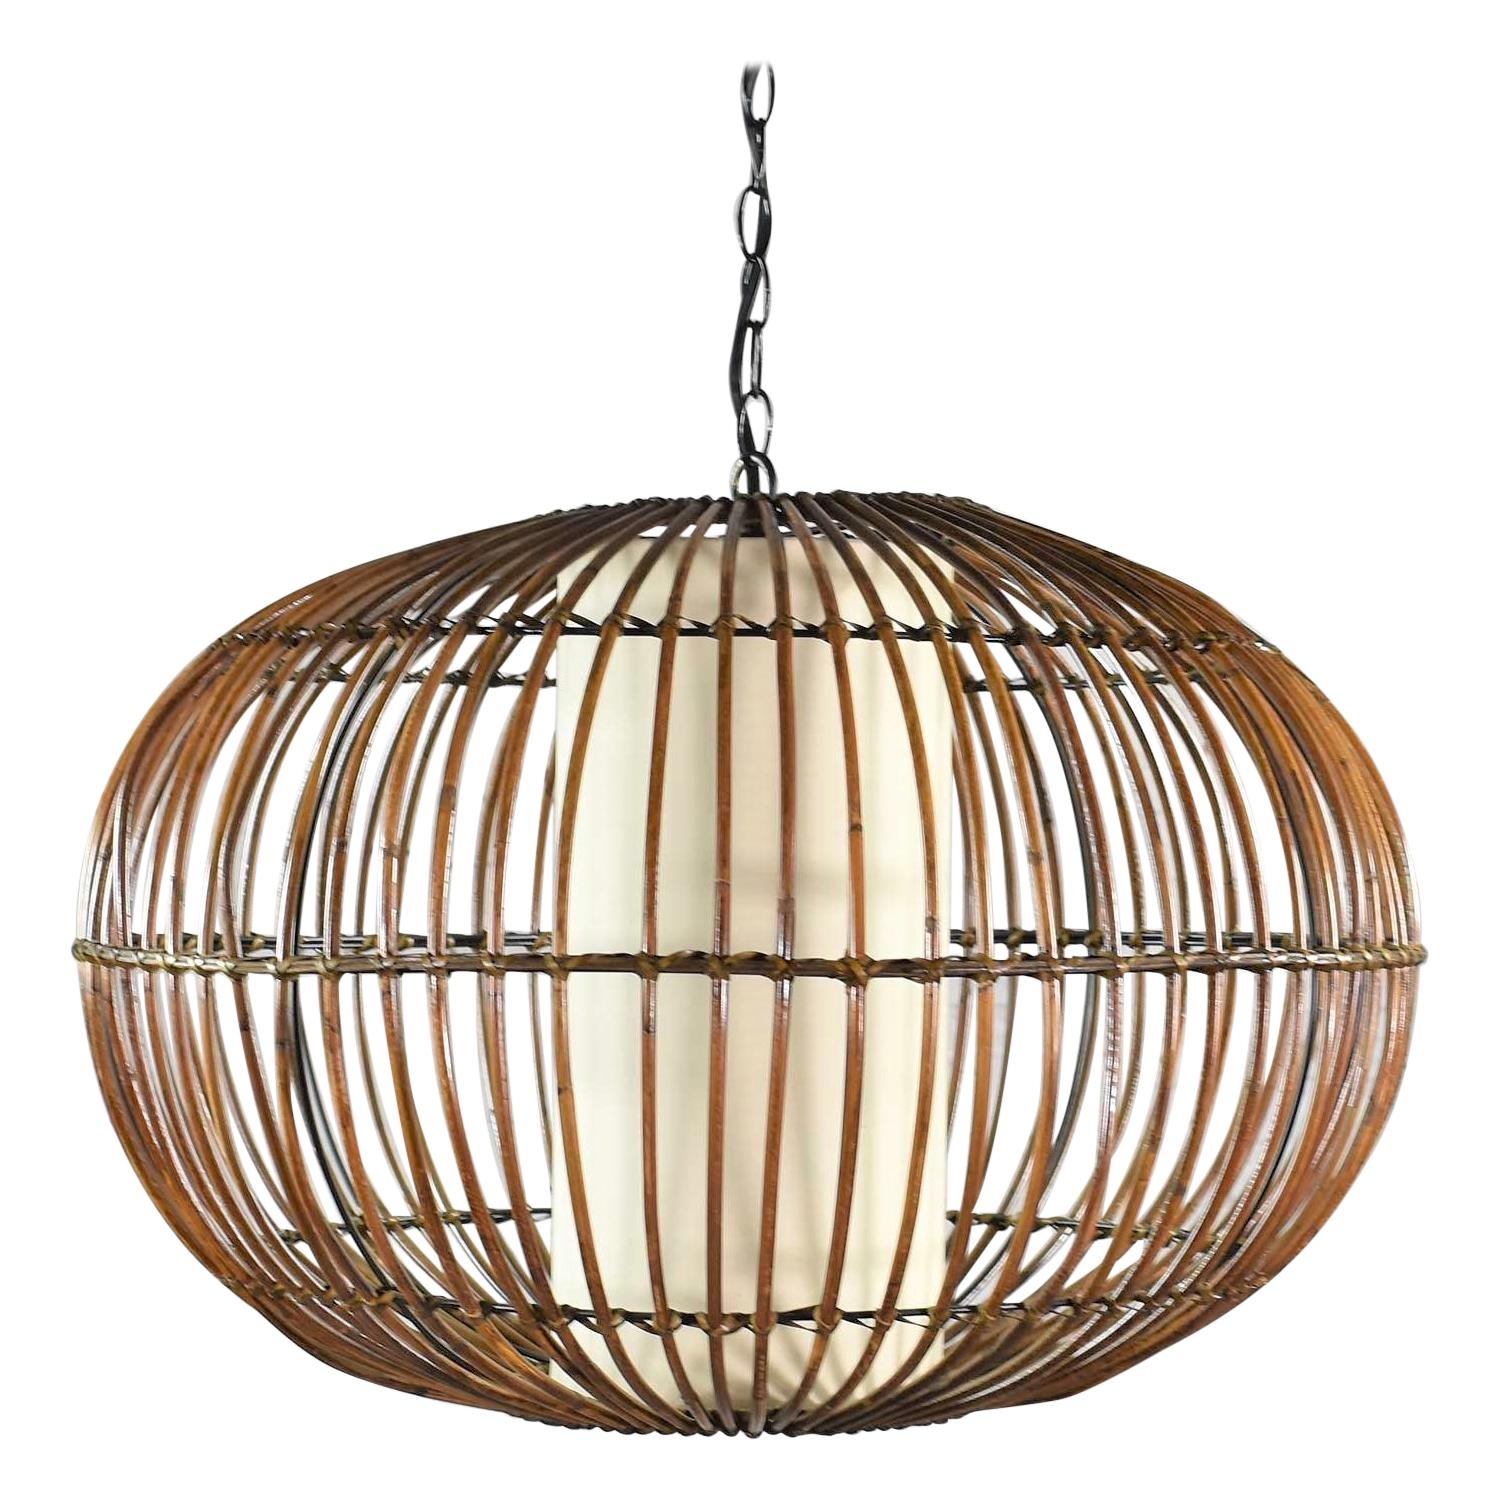 MCM Rattan Cage Pendant Chandelier with Interior Shade after Franco Albini